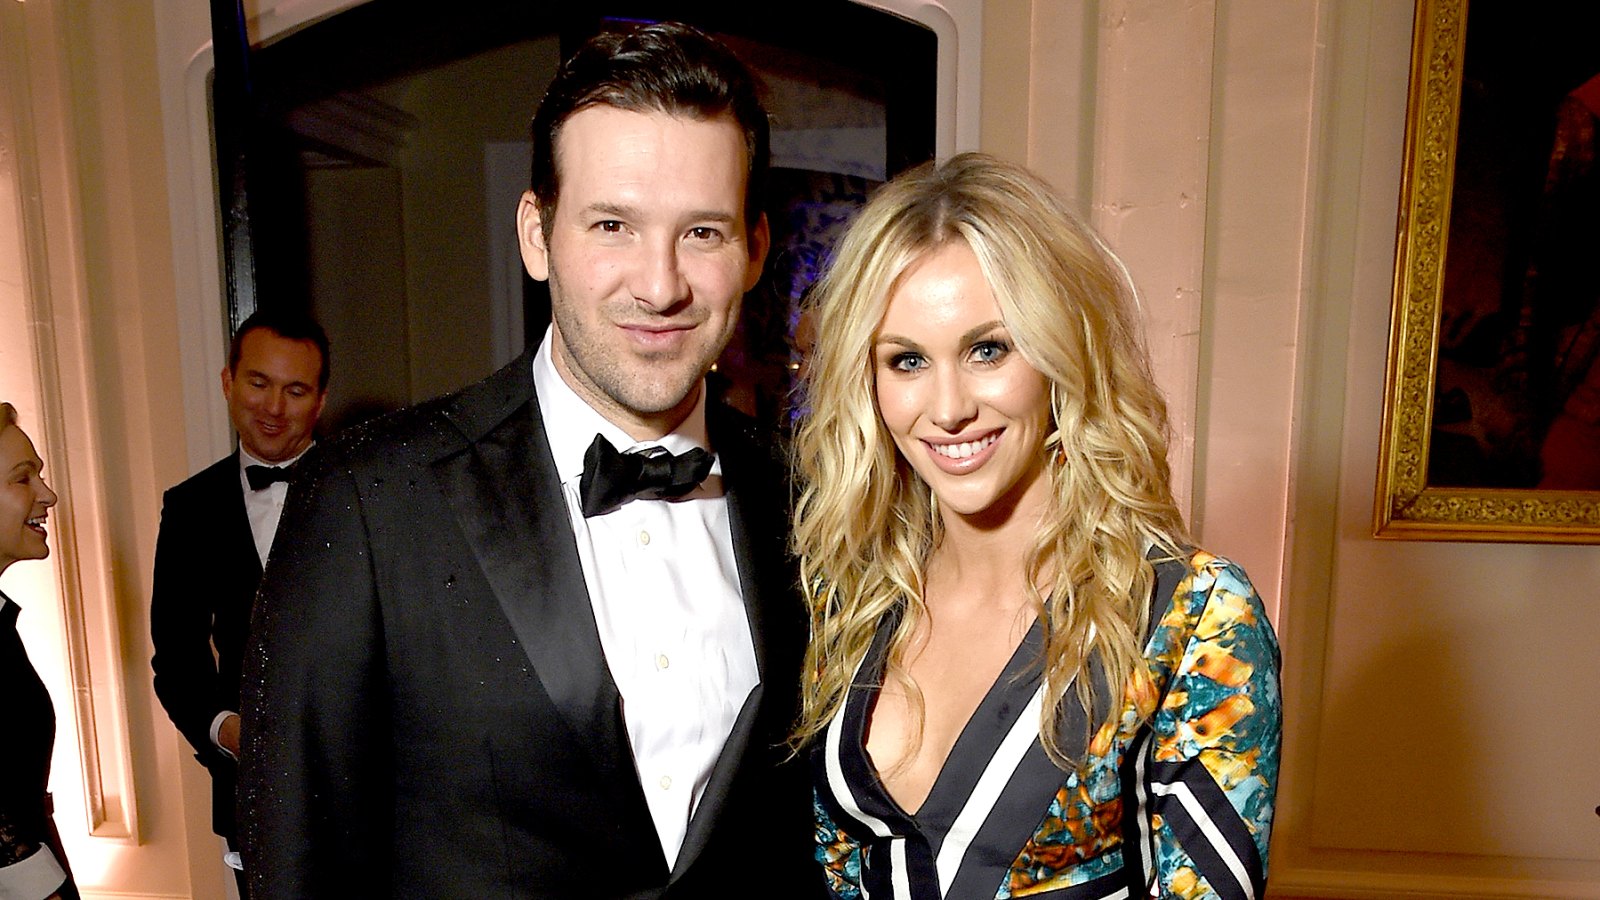 Tony Romo and Candice Crawford attend the Bloomberg & Vanity Fair cocktail reception following the 2015 WHCA Dinner at the residence of the French Ambassador on April 25, 2015 in Washington, DC.